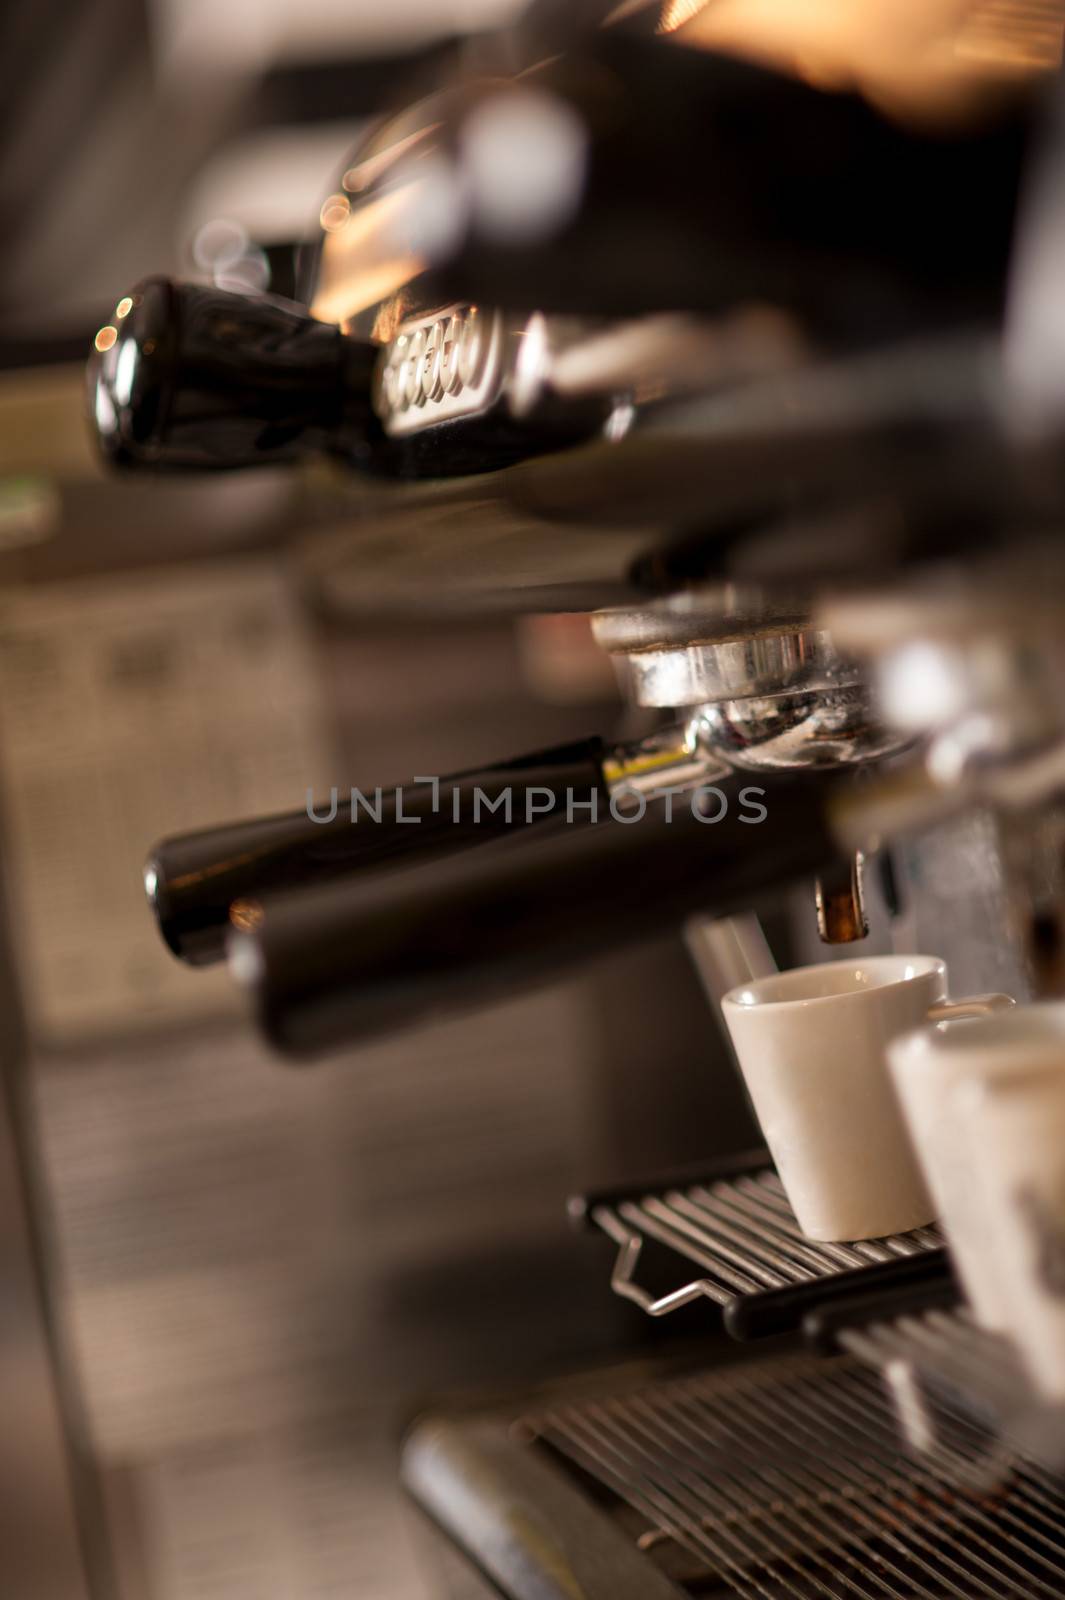 Hot espresso coffee! by stockyimages